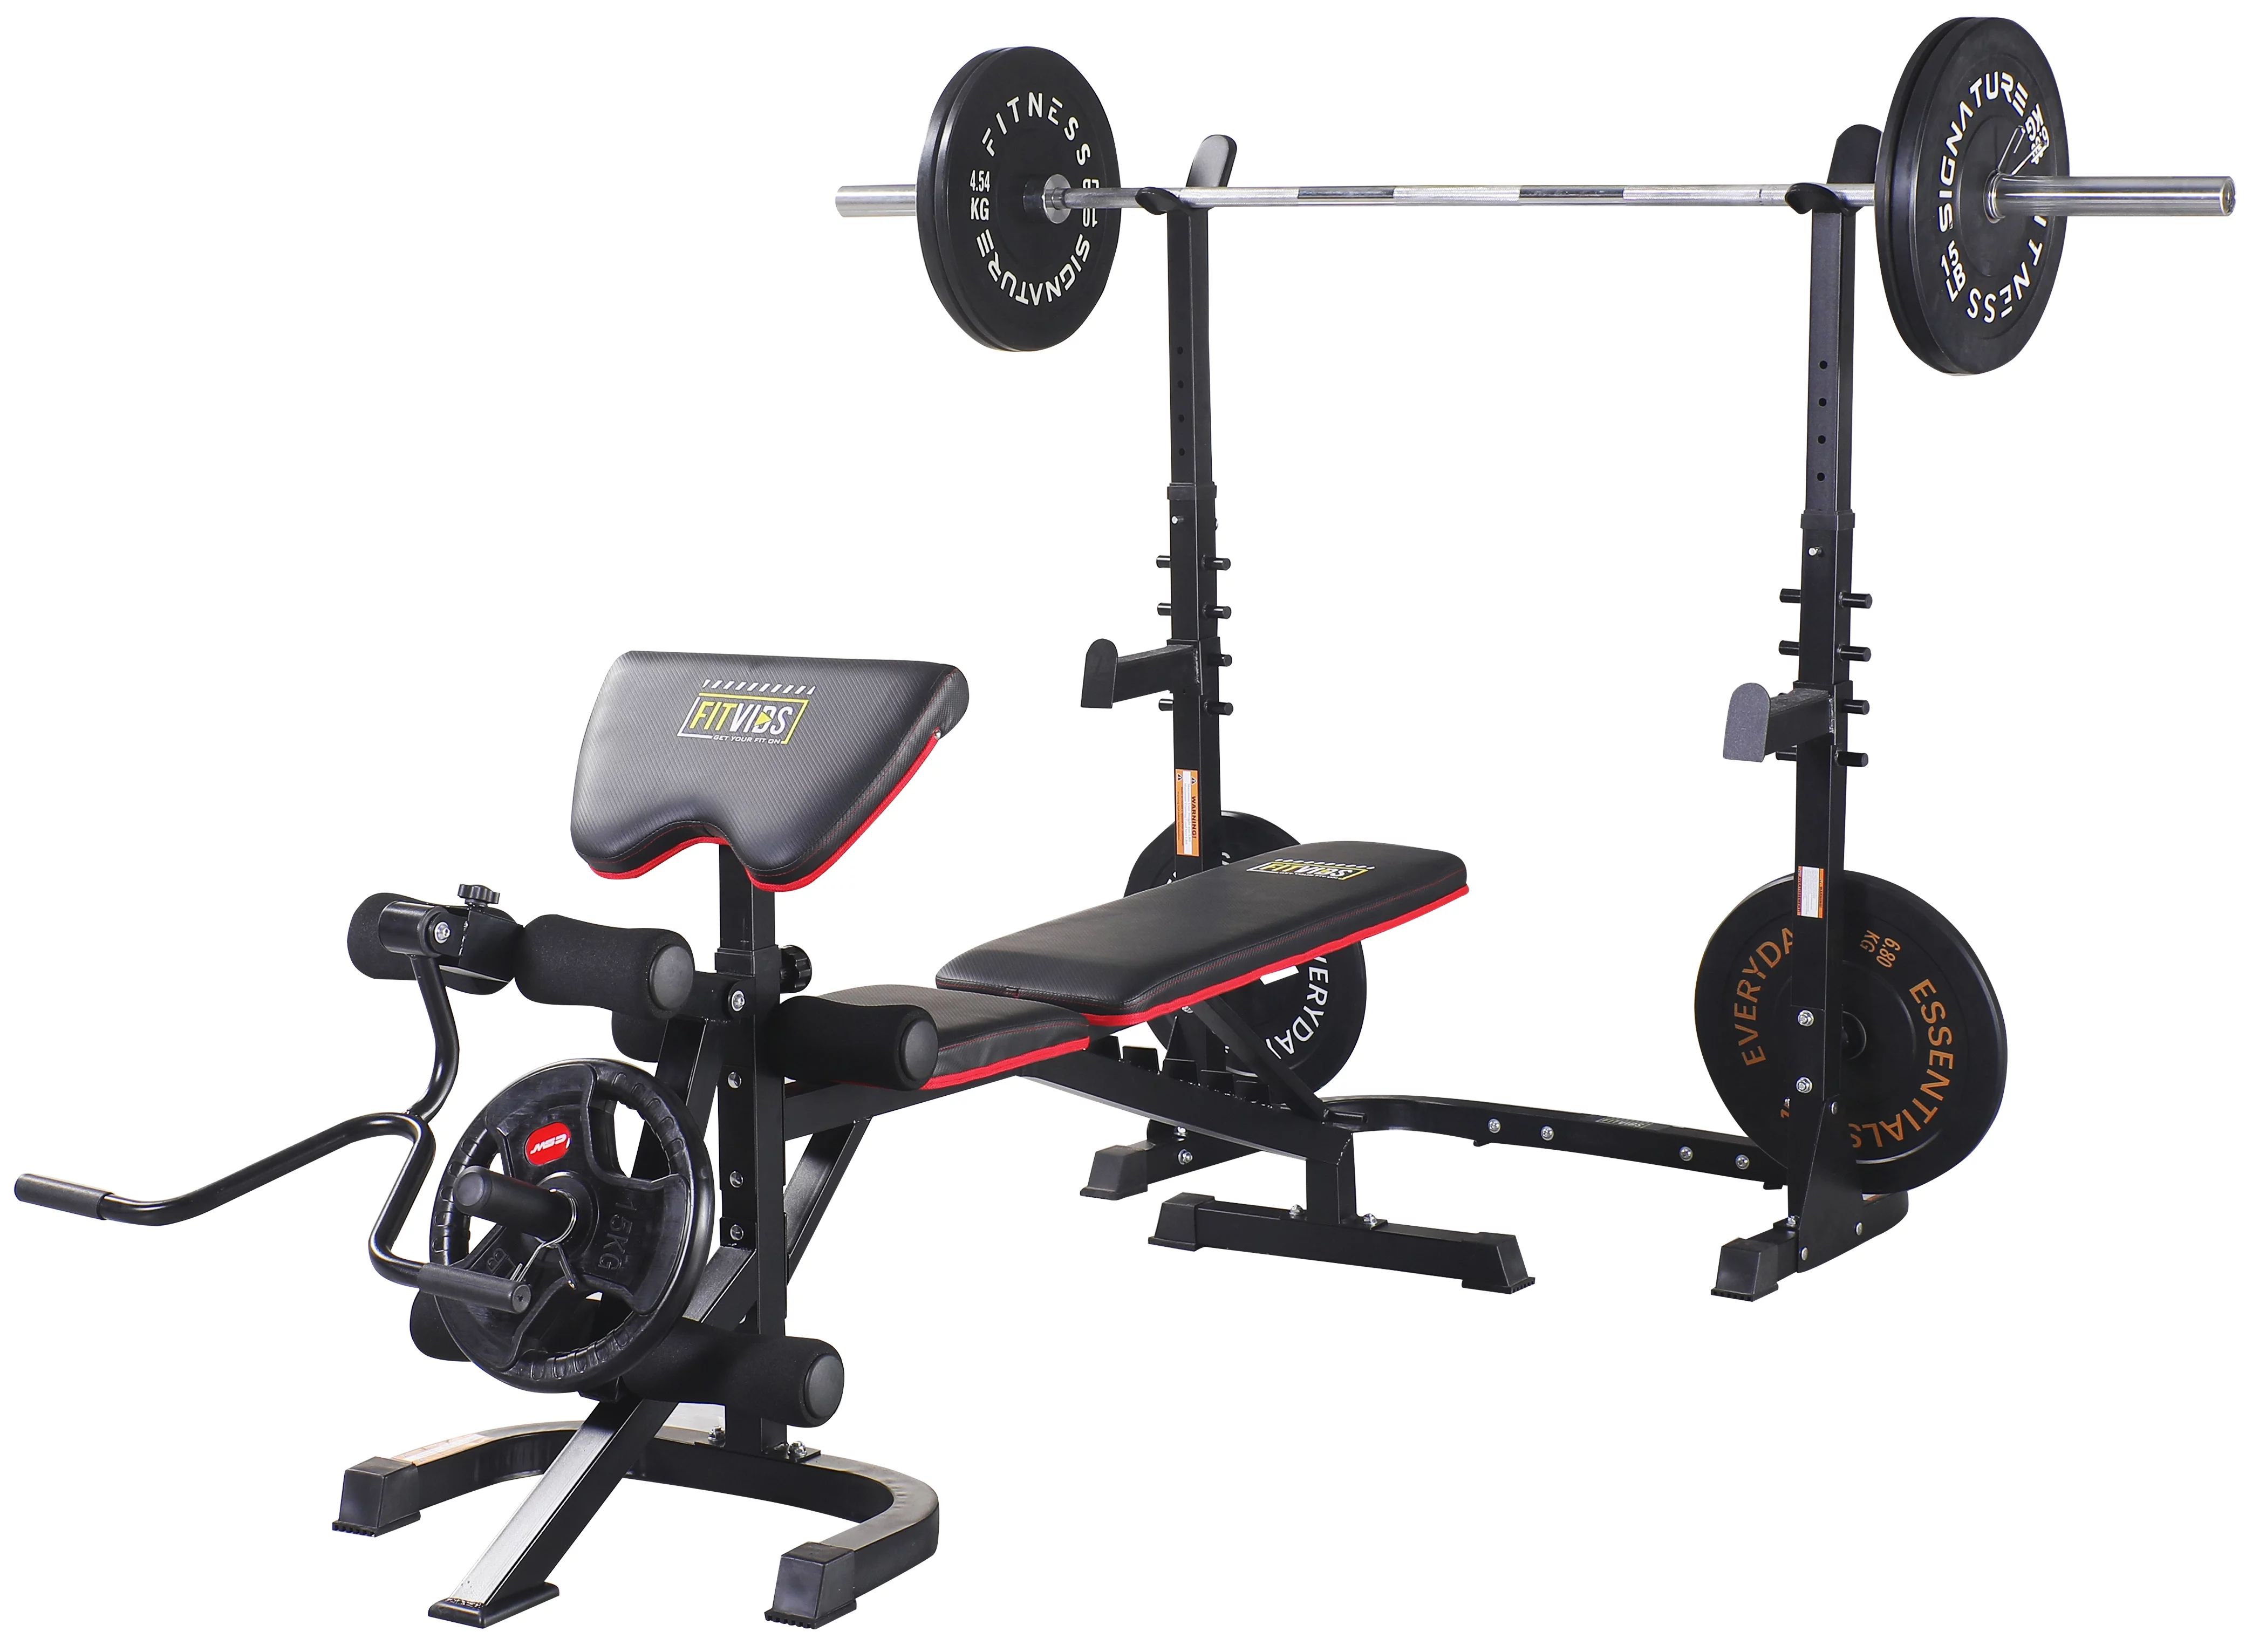 Fitvids LX600 Adjustable Olympic Workout Bench with Squat Rack, Leg Extension, Preacher Curl, and... | Walmart (US)